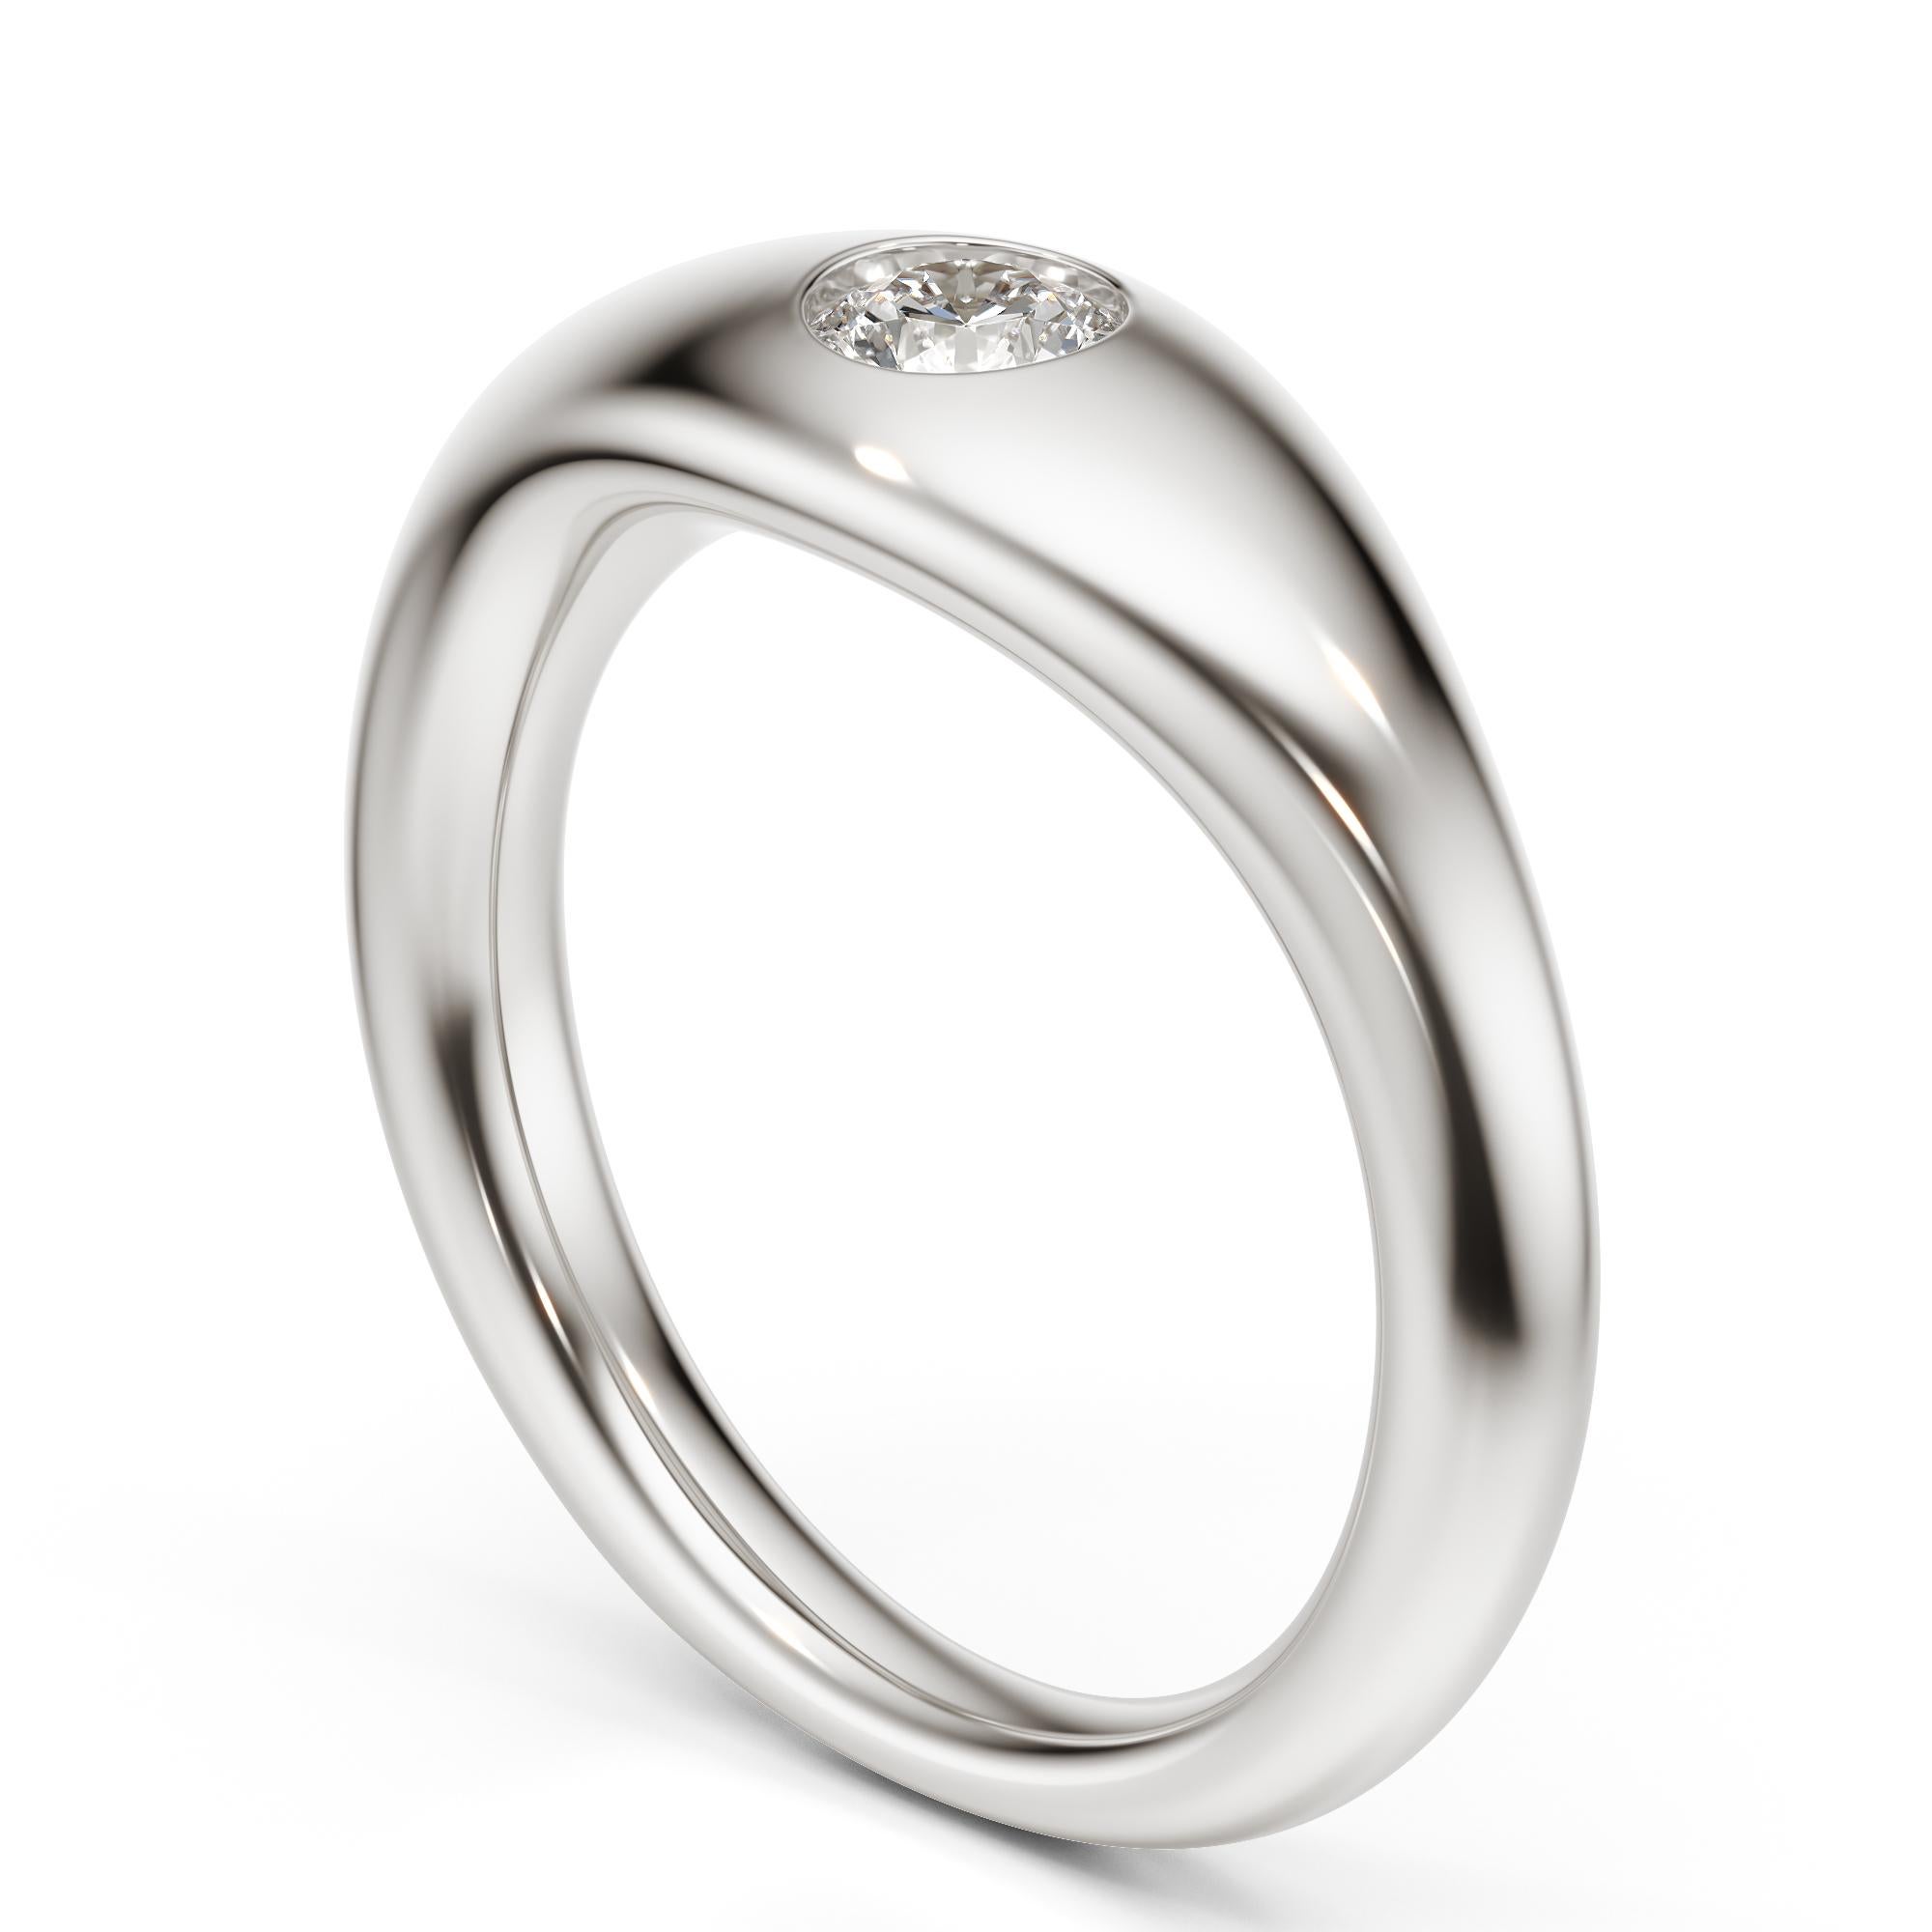 For Sale:  Ruth Nyc Lun Ring, 14k White Gold and Diamond 3